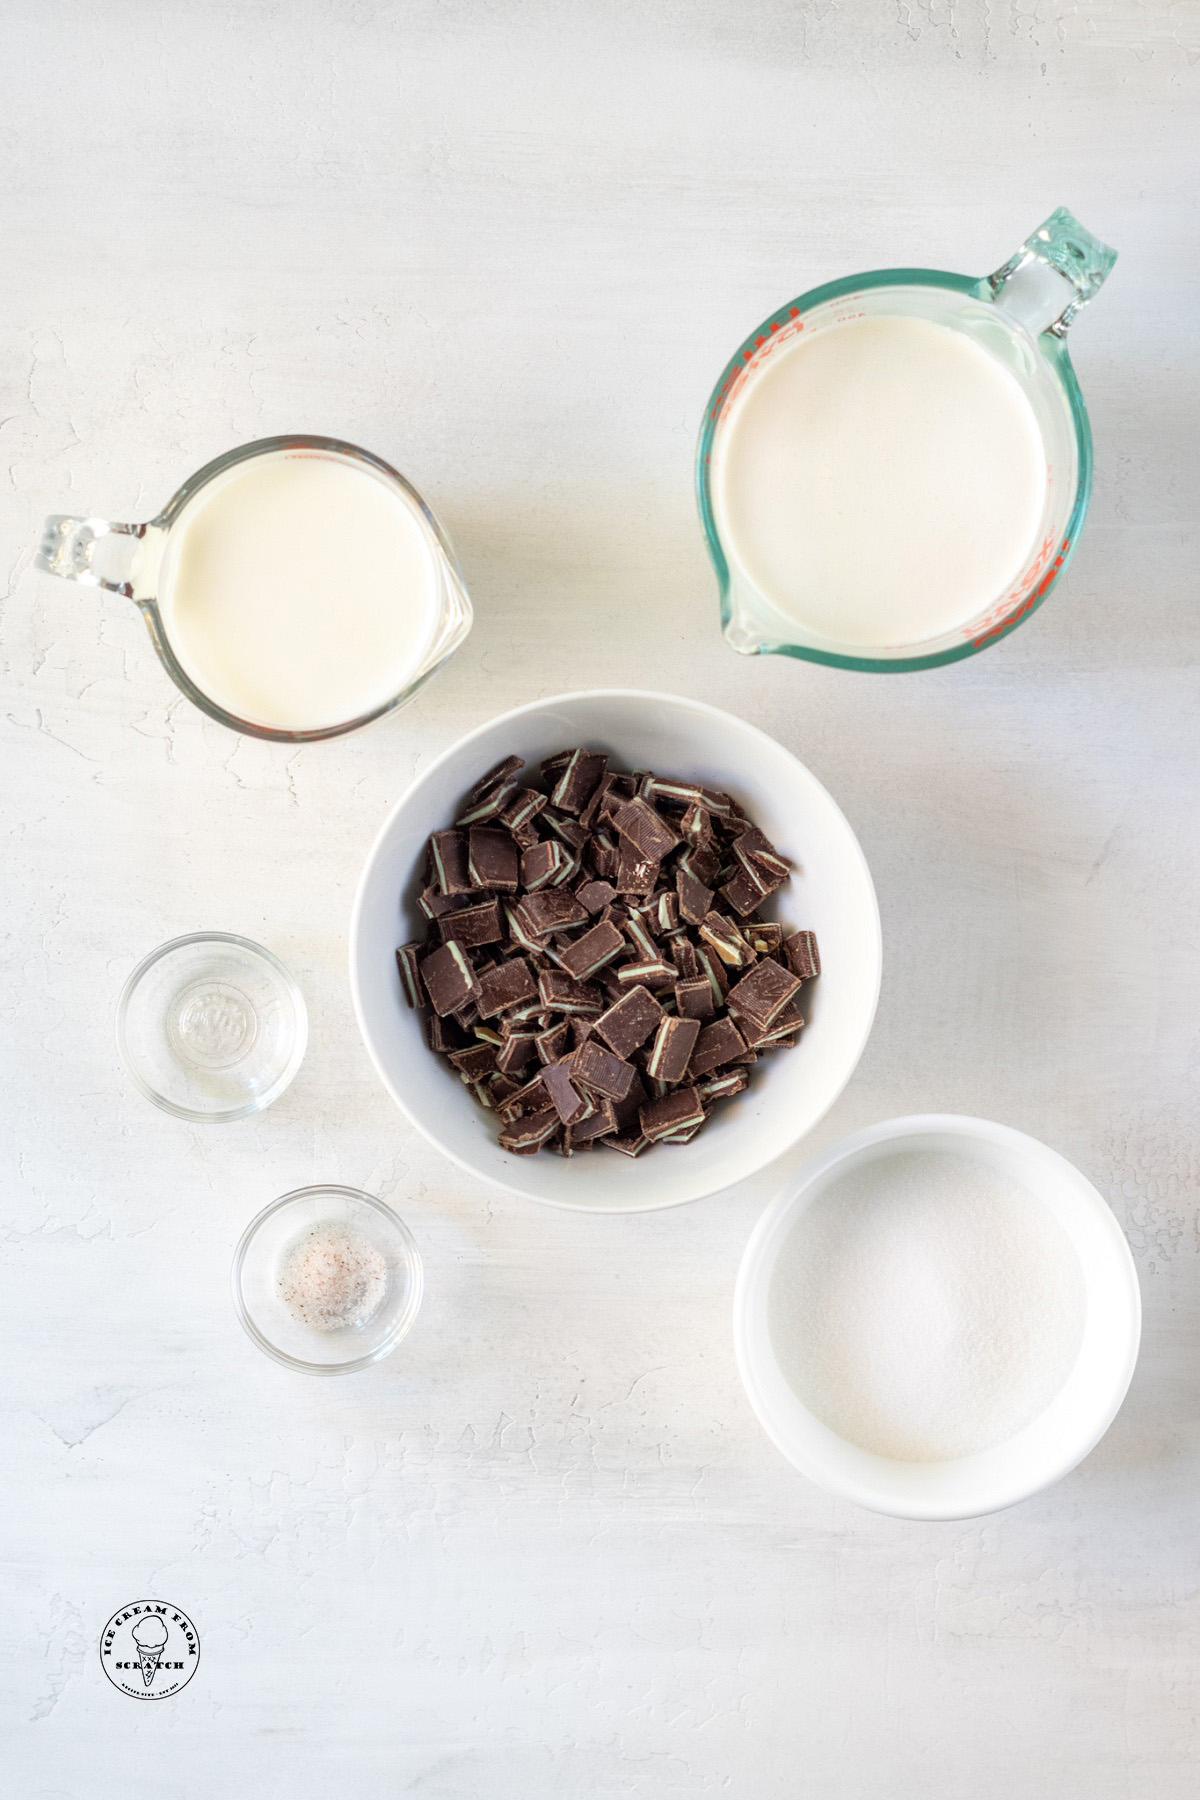 The ingredients needed to make andes ice cream recipe, including chopped chocolates, milk, and cream.